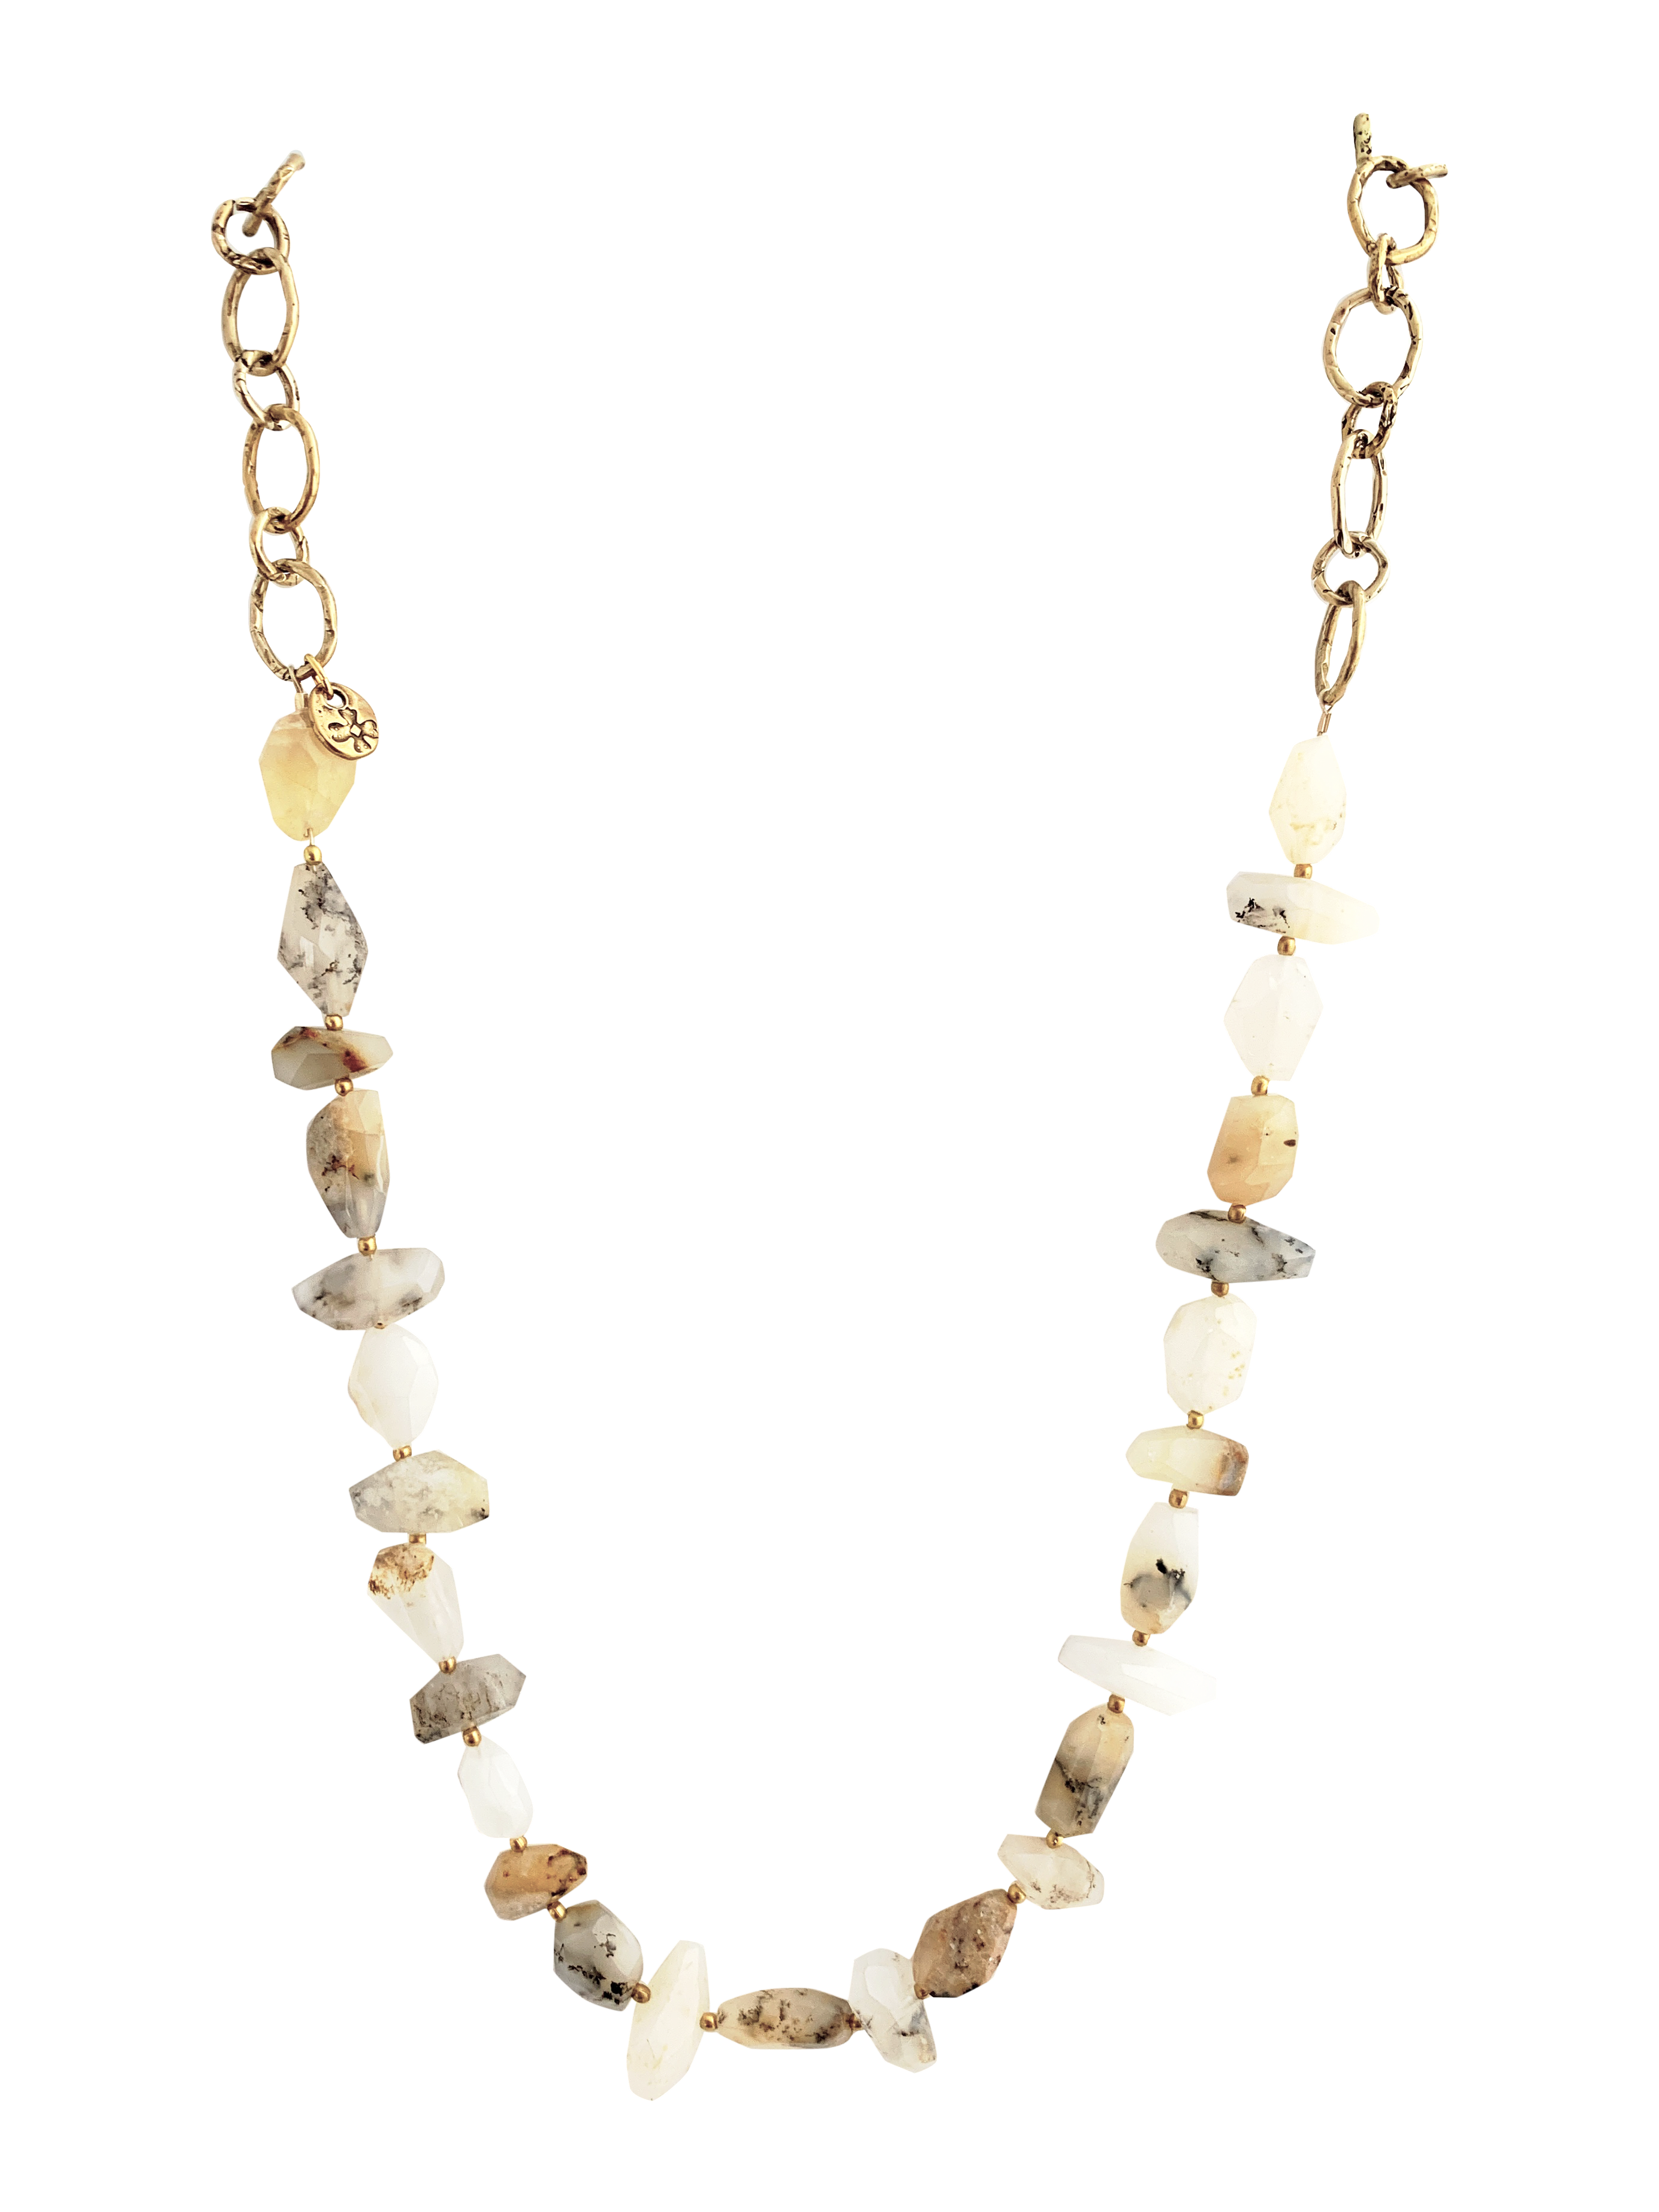 Dendrite Opal Statement Necklace